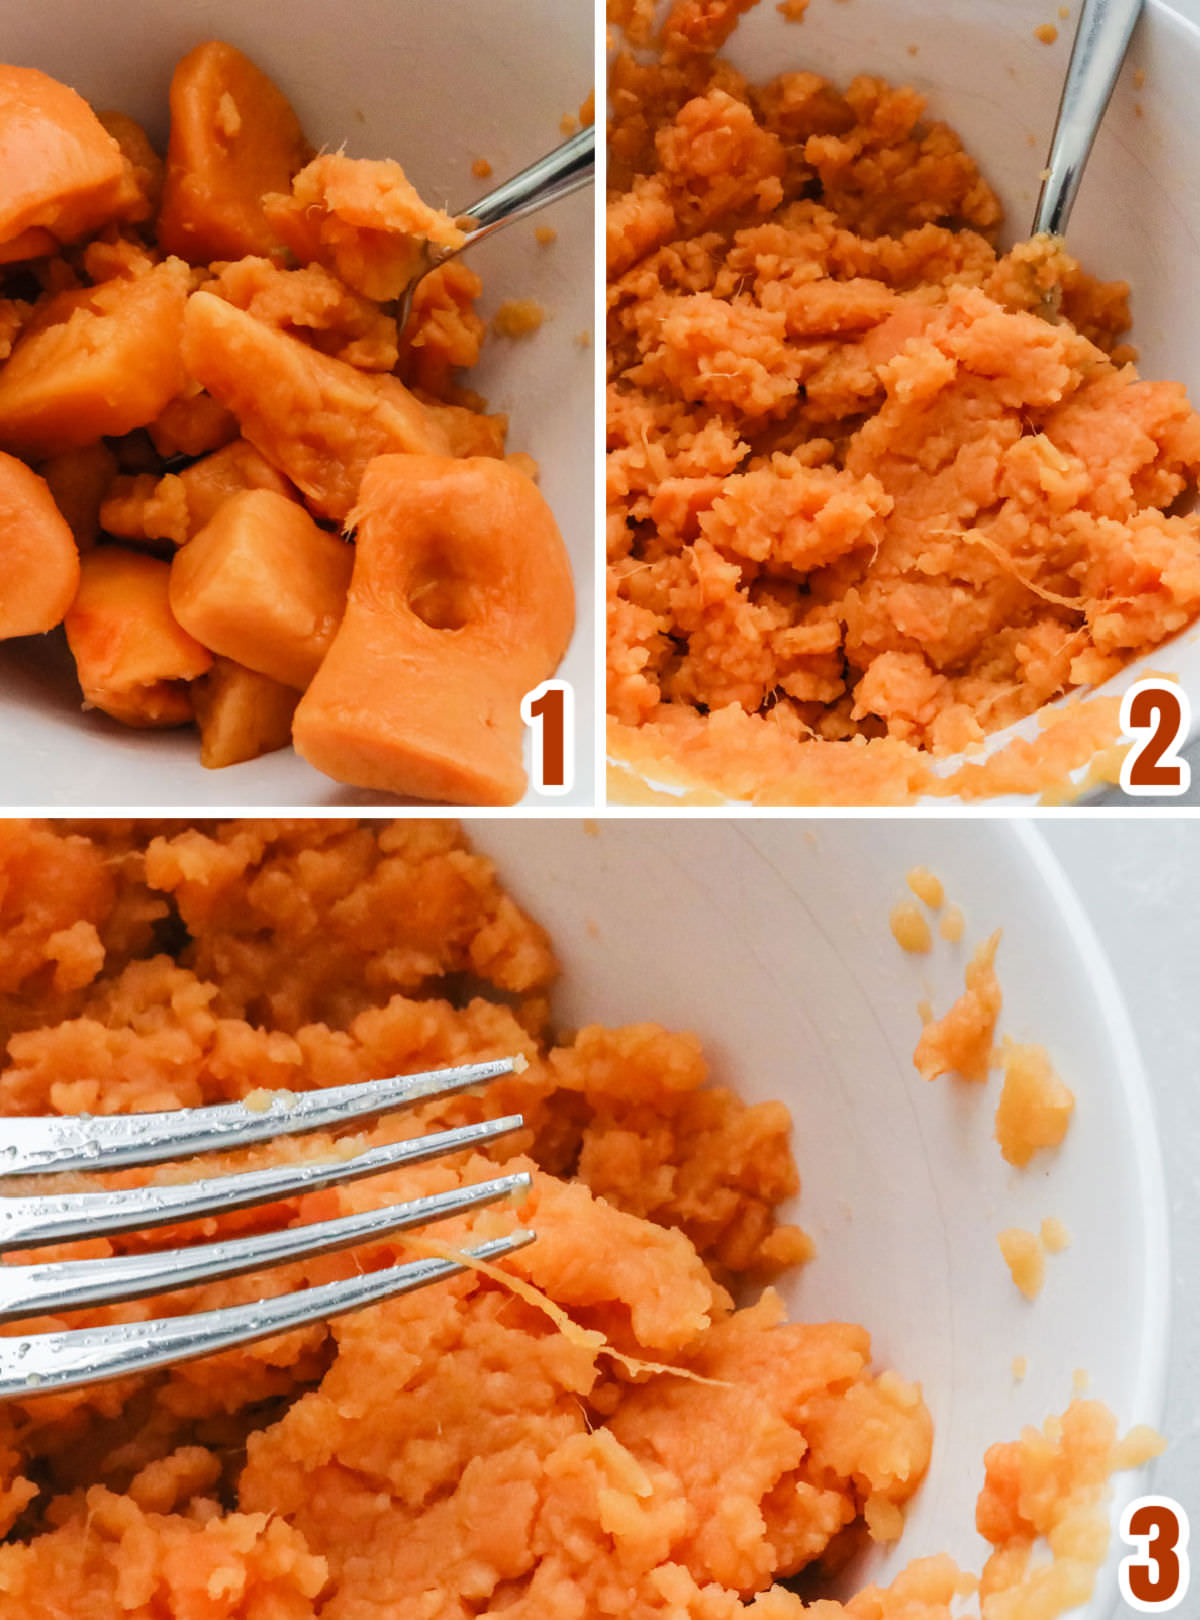 Collage image showing how to mash up the canned Sweet Potatoes.